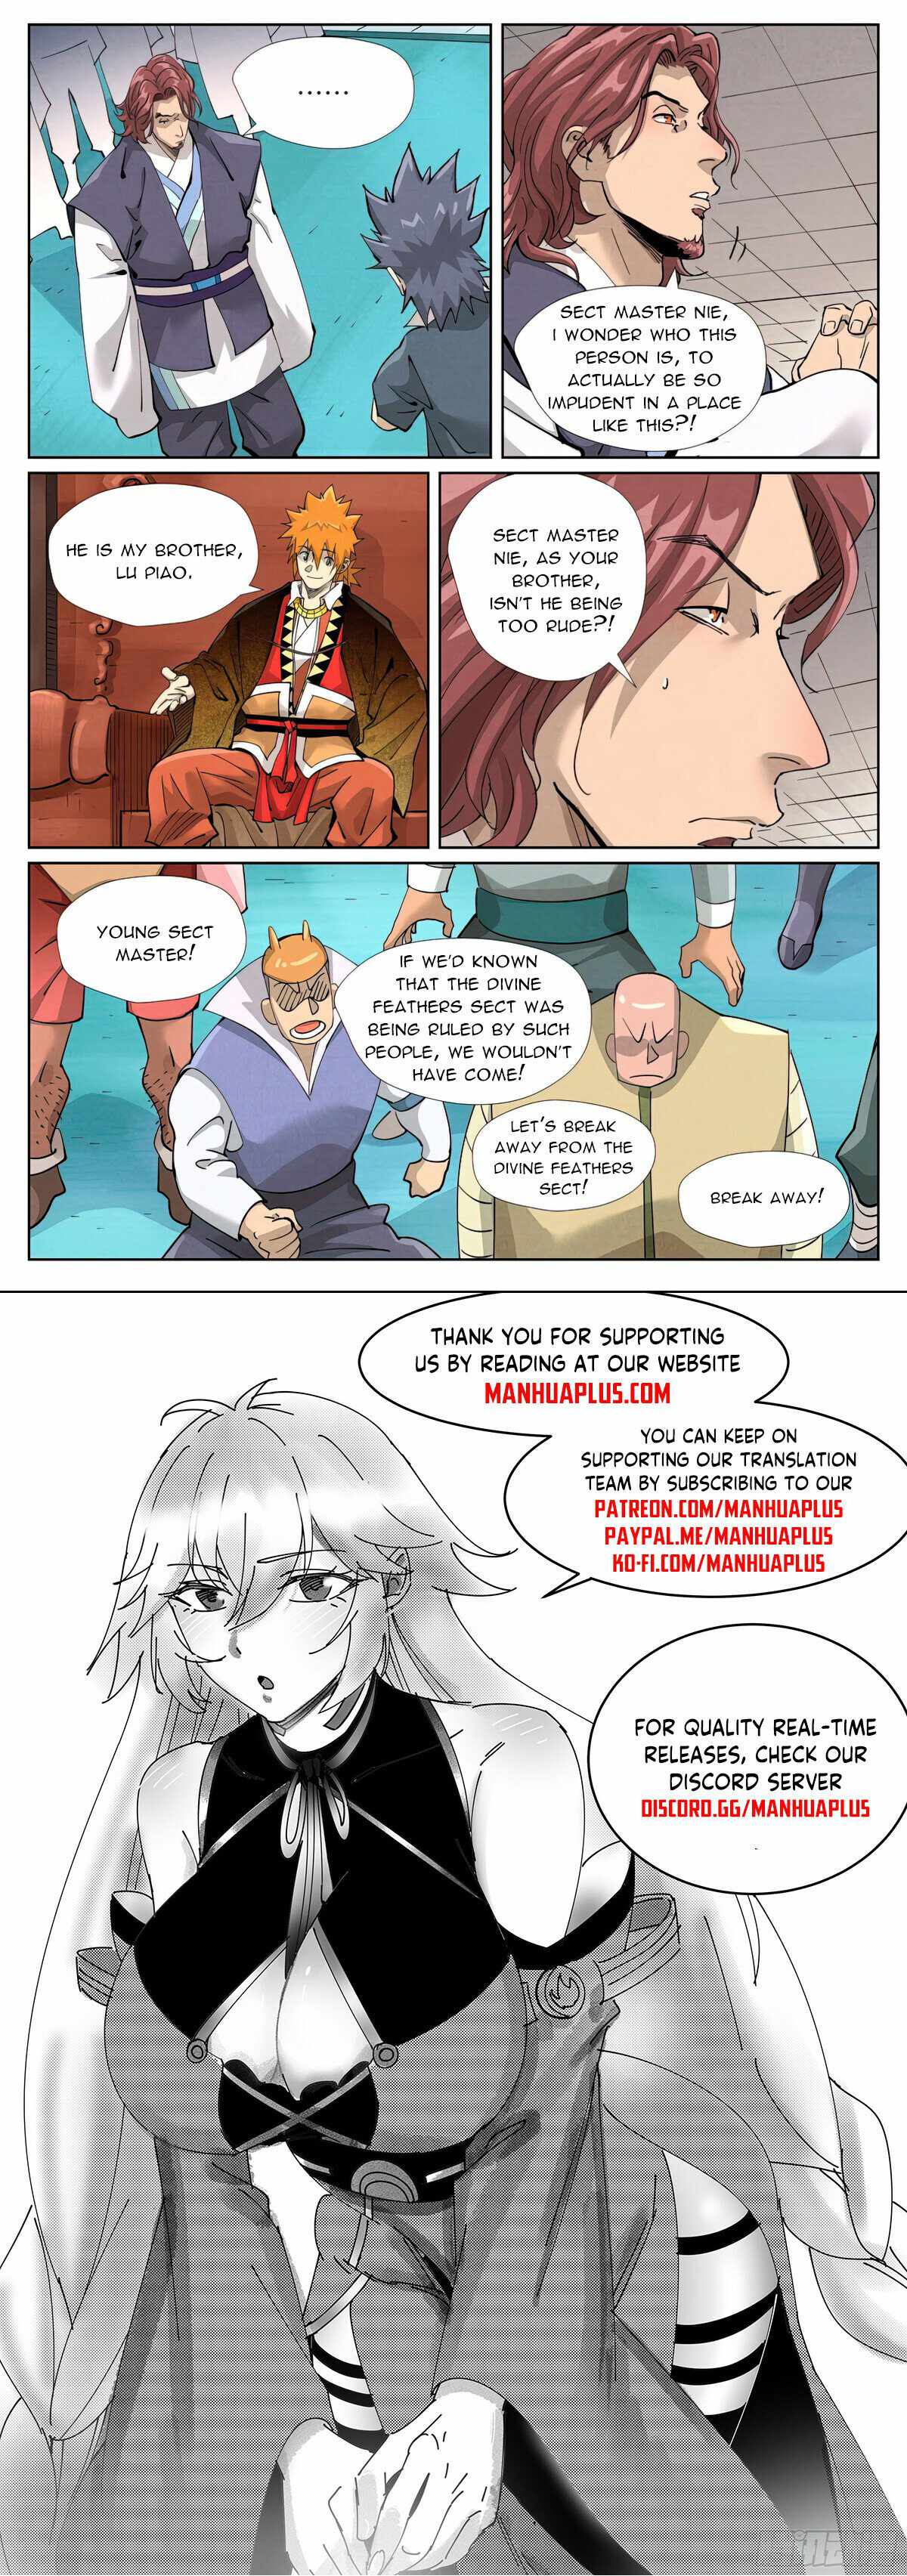 Tales of Demons and Gods Chapter 430-1-eng-li - Page 8